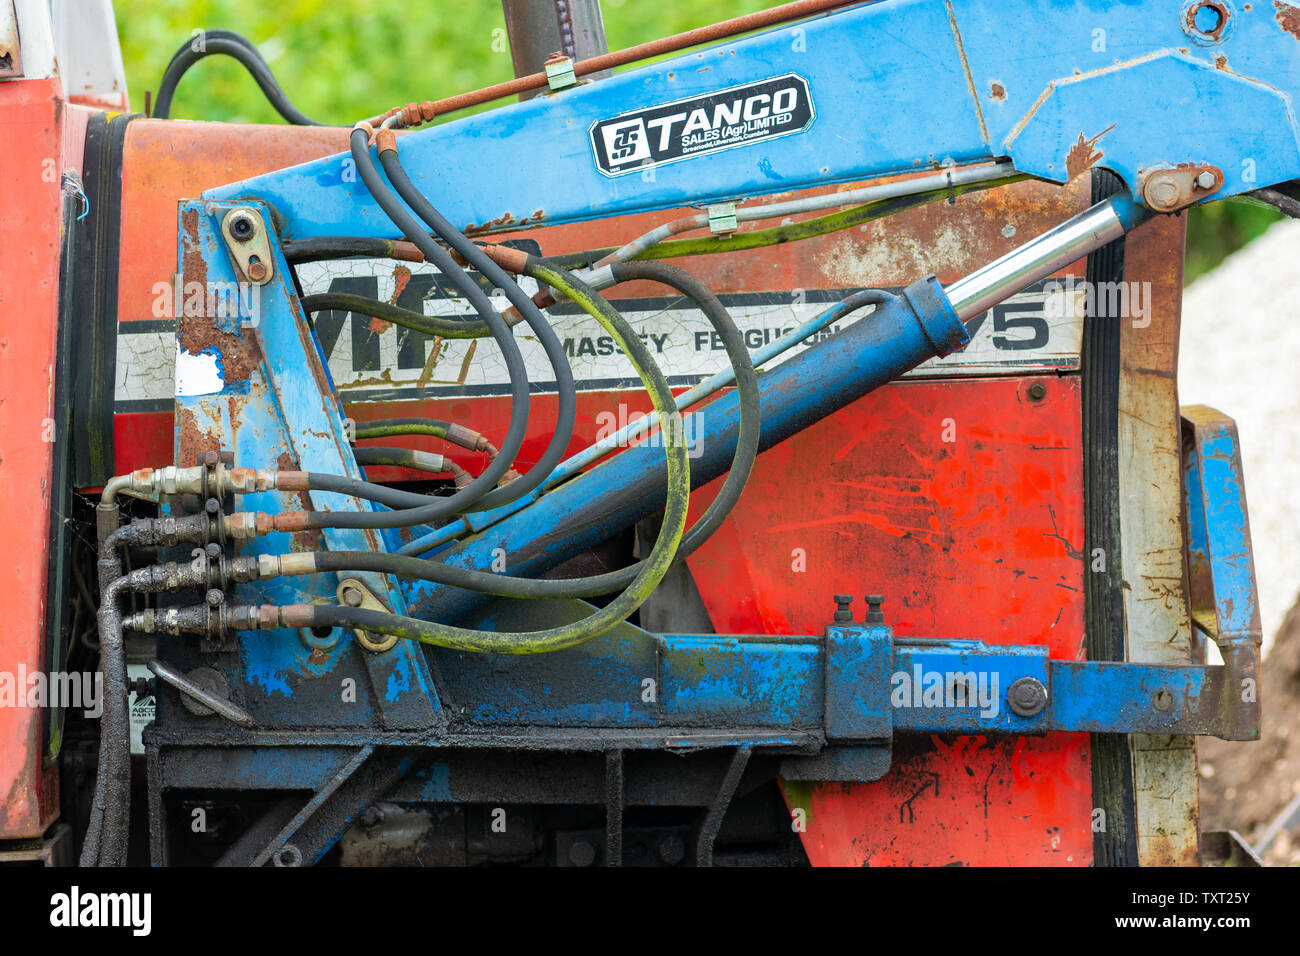 Close up of hydraulics of an old blue and red Massey Ferguson tractor Stock Photo